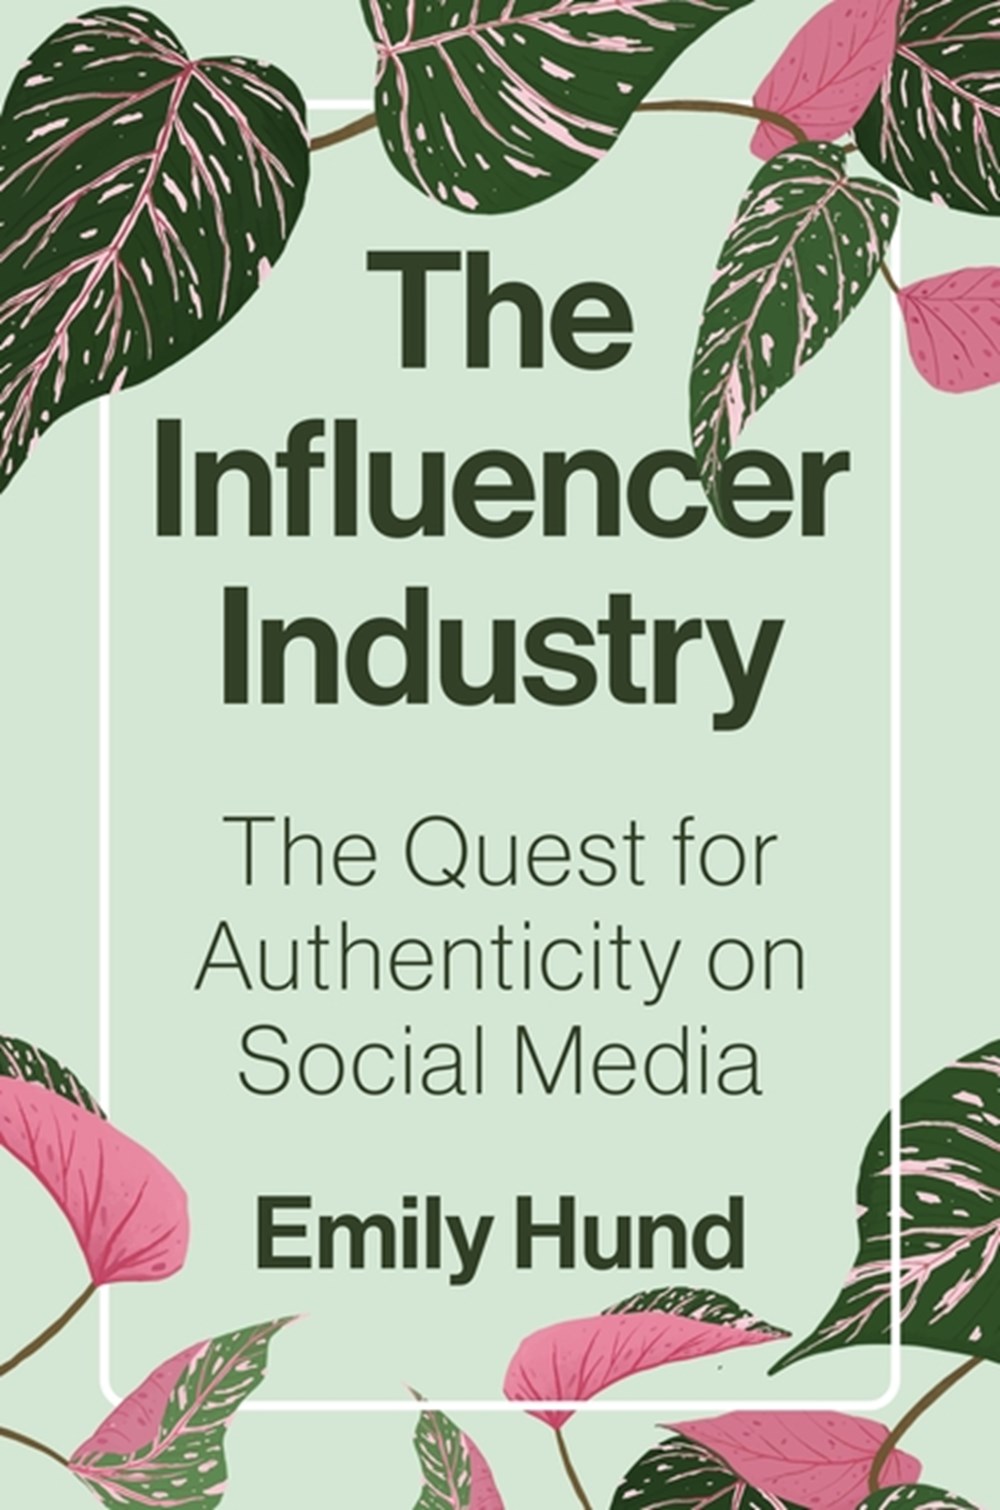 Influencer Industry: The Quest for Authenticity on Social Media